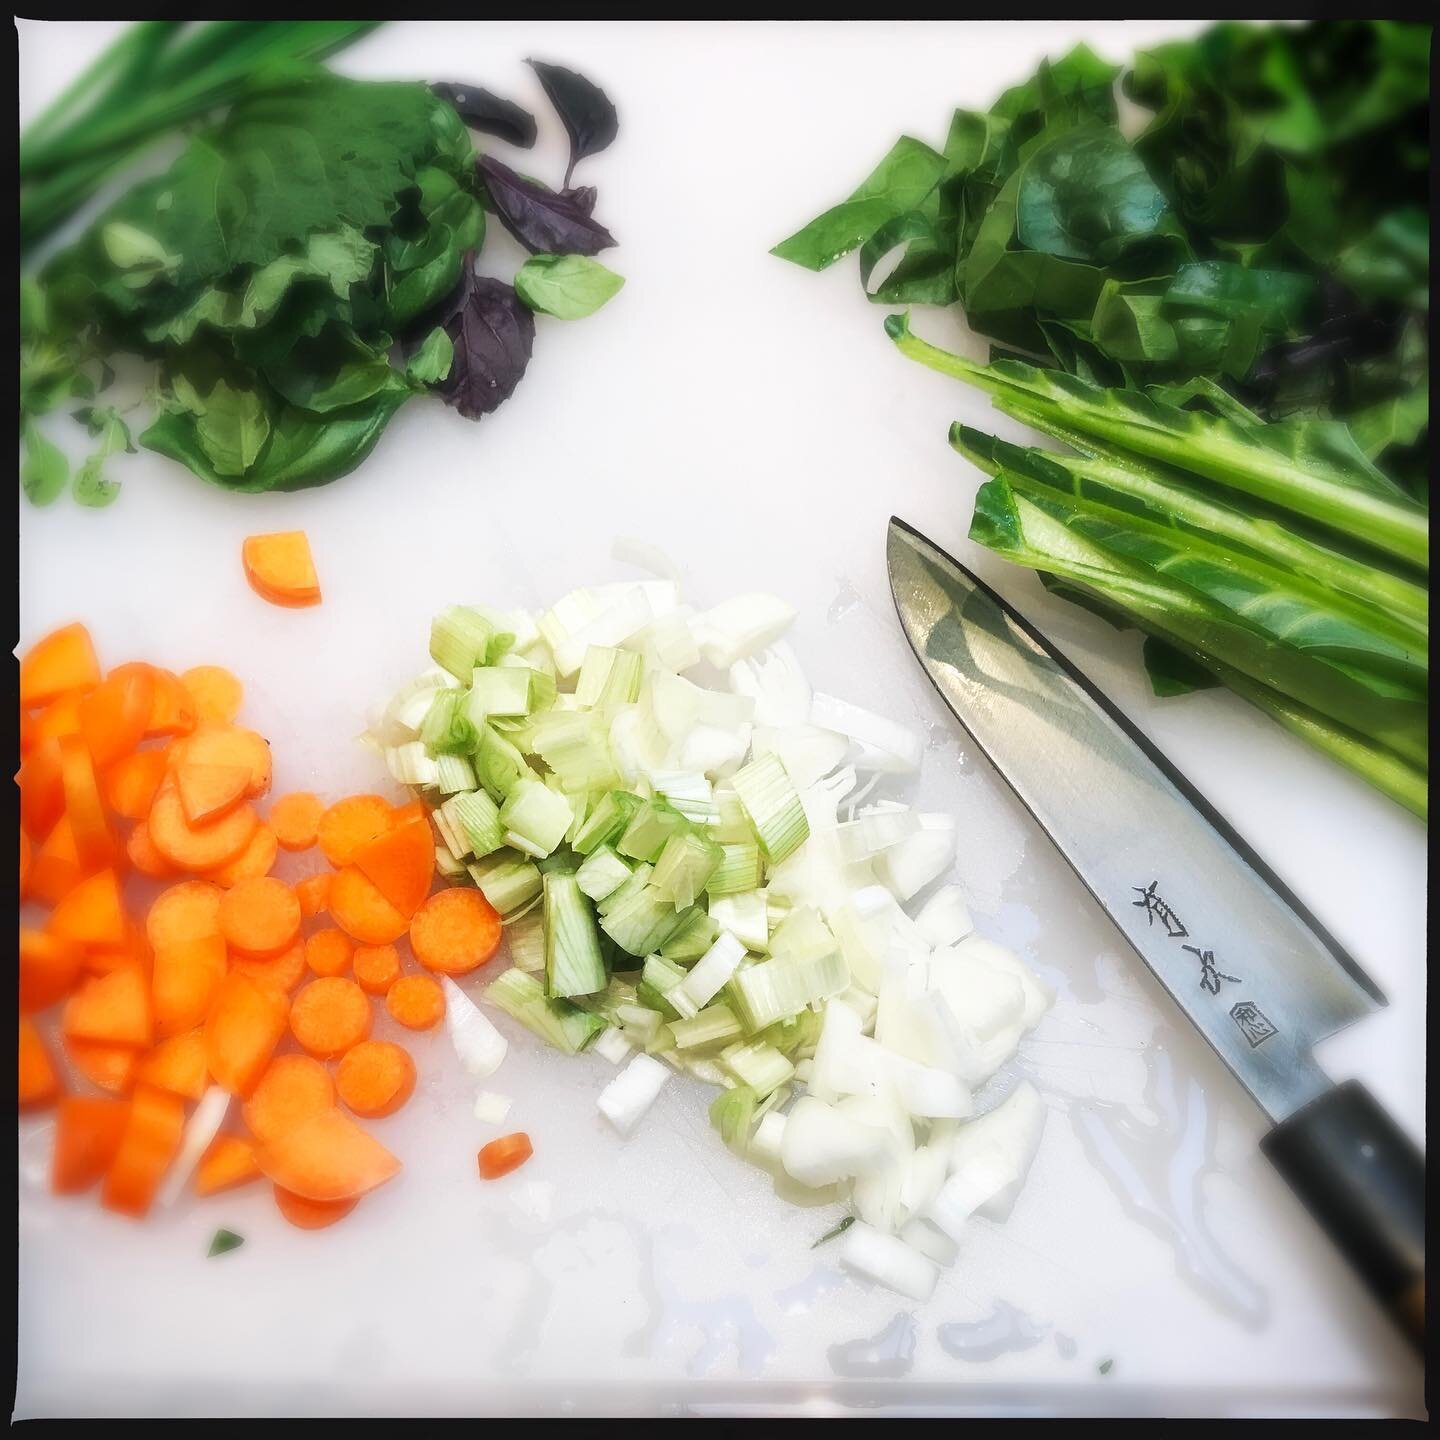 #beforeandafter #gardengoodies #carrots #chard #herbs #shallots #risotto #primavera ...................... And thou ❤️ Thanks to @adteckelhaus for being the best studio assistant today!